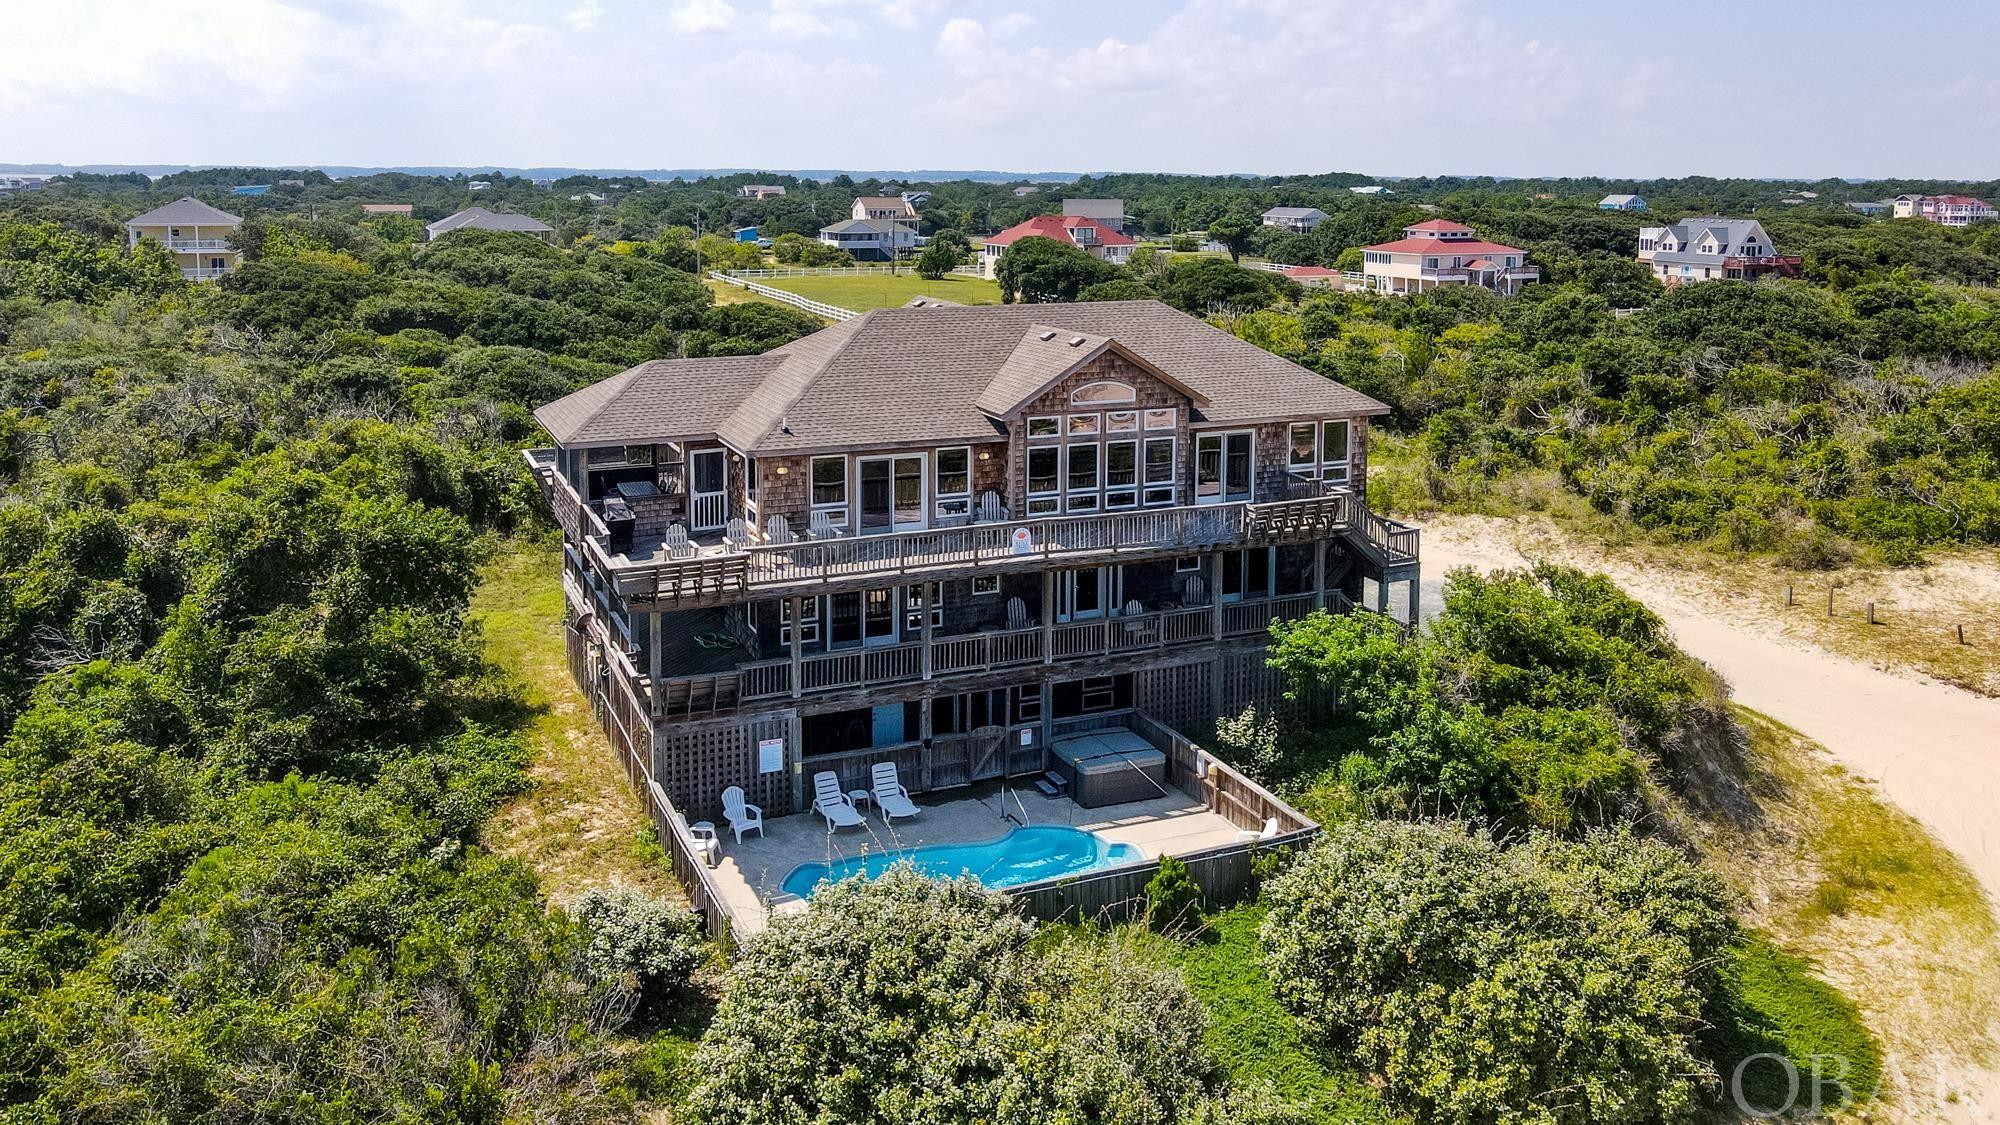 This semi-oceanfront home has everything that you look for in a great beach house in Carova.  The home sits on an elevated ridge with great ocean views and with no flood insurance required.  Right under 4,500 sq/ft, this house has a great layout with large bedrooms, custom finishes and a huge rec room that leads out to the ocean facing pool.   All six bedrooms have their own private bathroom and most lead out to decks where you can enjoy ocean views and wild horses roaming.  The third level great room is filled with natural light and a wall of windows on the east side of the house.  This area also comes equipped with Brazilian cherry hardwood floors, granite countertops and a large kitchen that any chef would desire.  New roof this past year, projected to do $146,090 in gross rents for 2024, this house makes for a great rental investment.